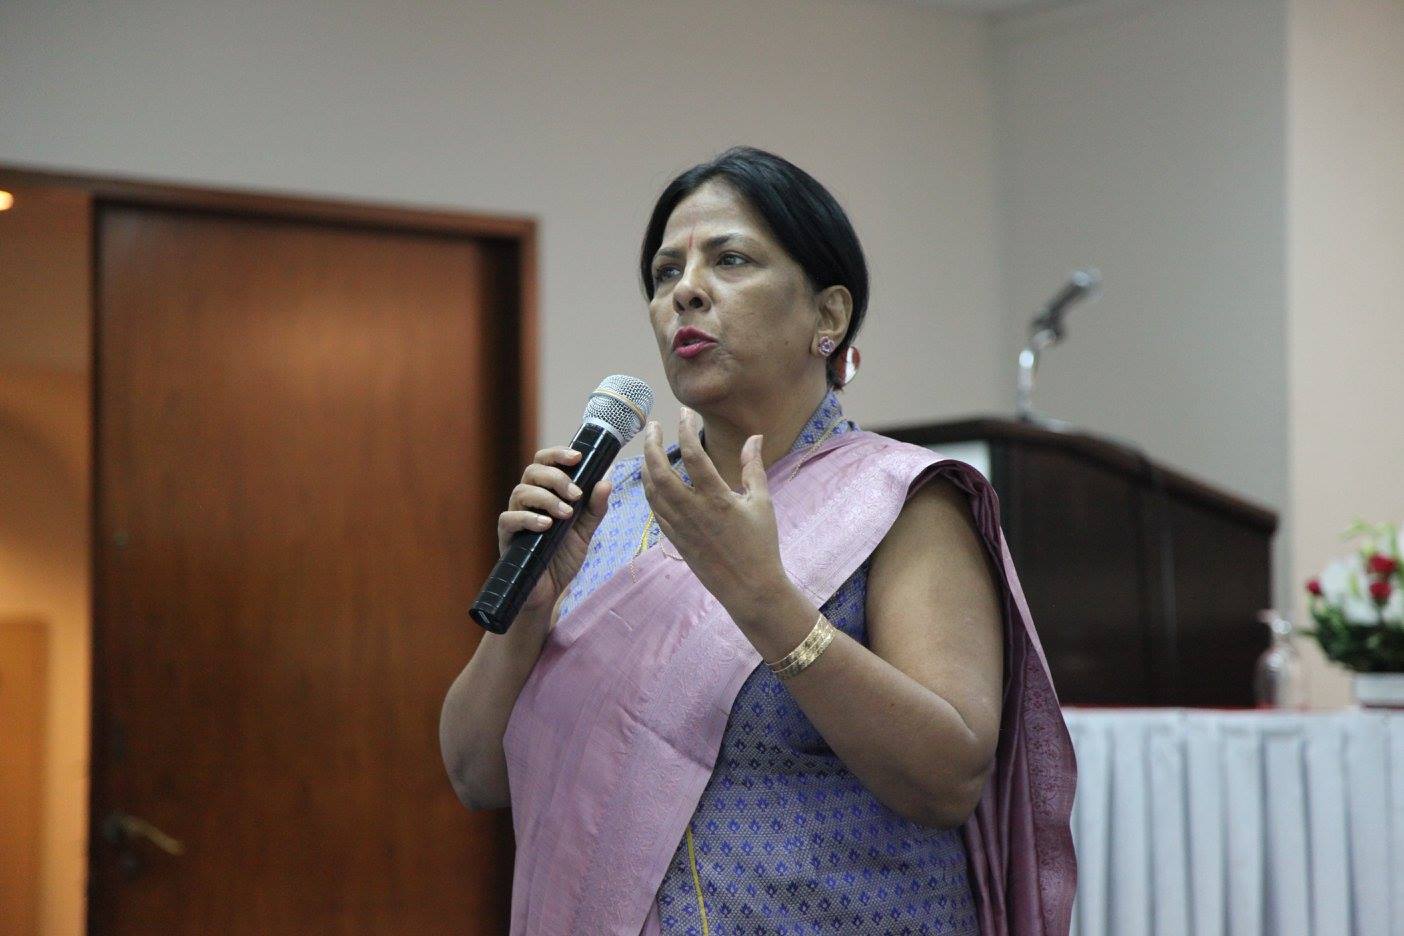 A woman in a purple sari speaks into a microphone